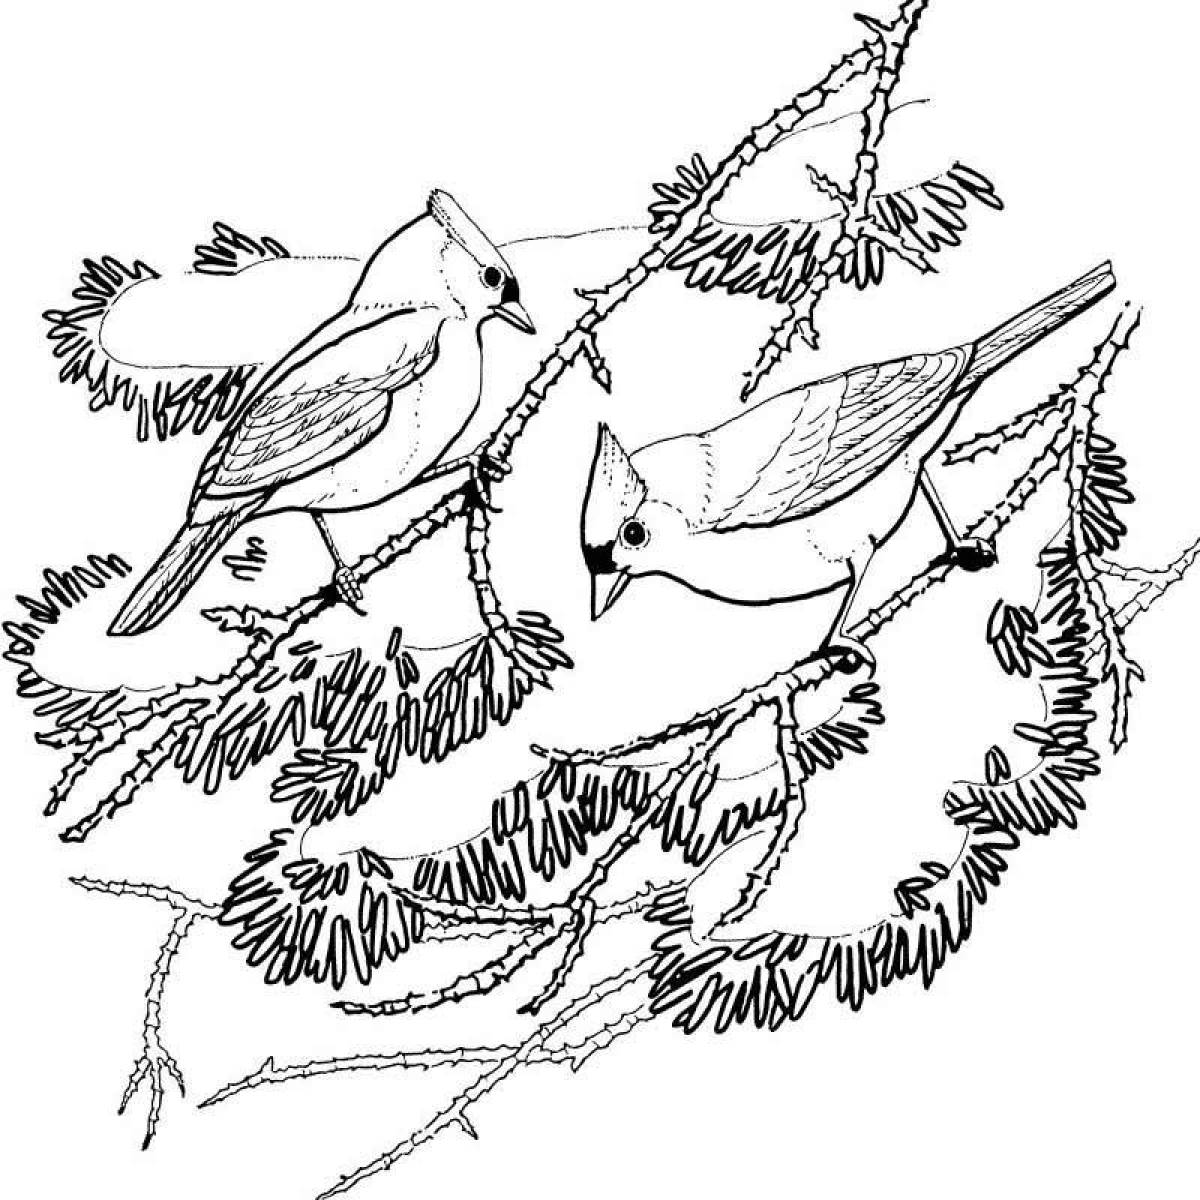 Coloring pages of wintering birds for children 6-7 years old